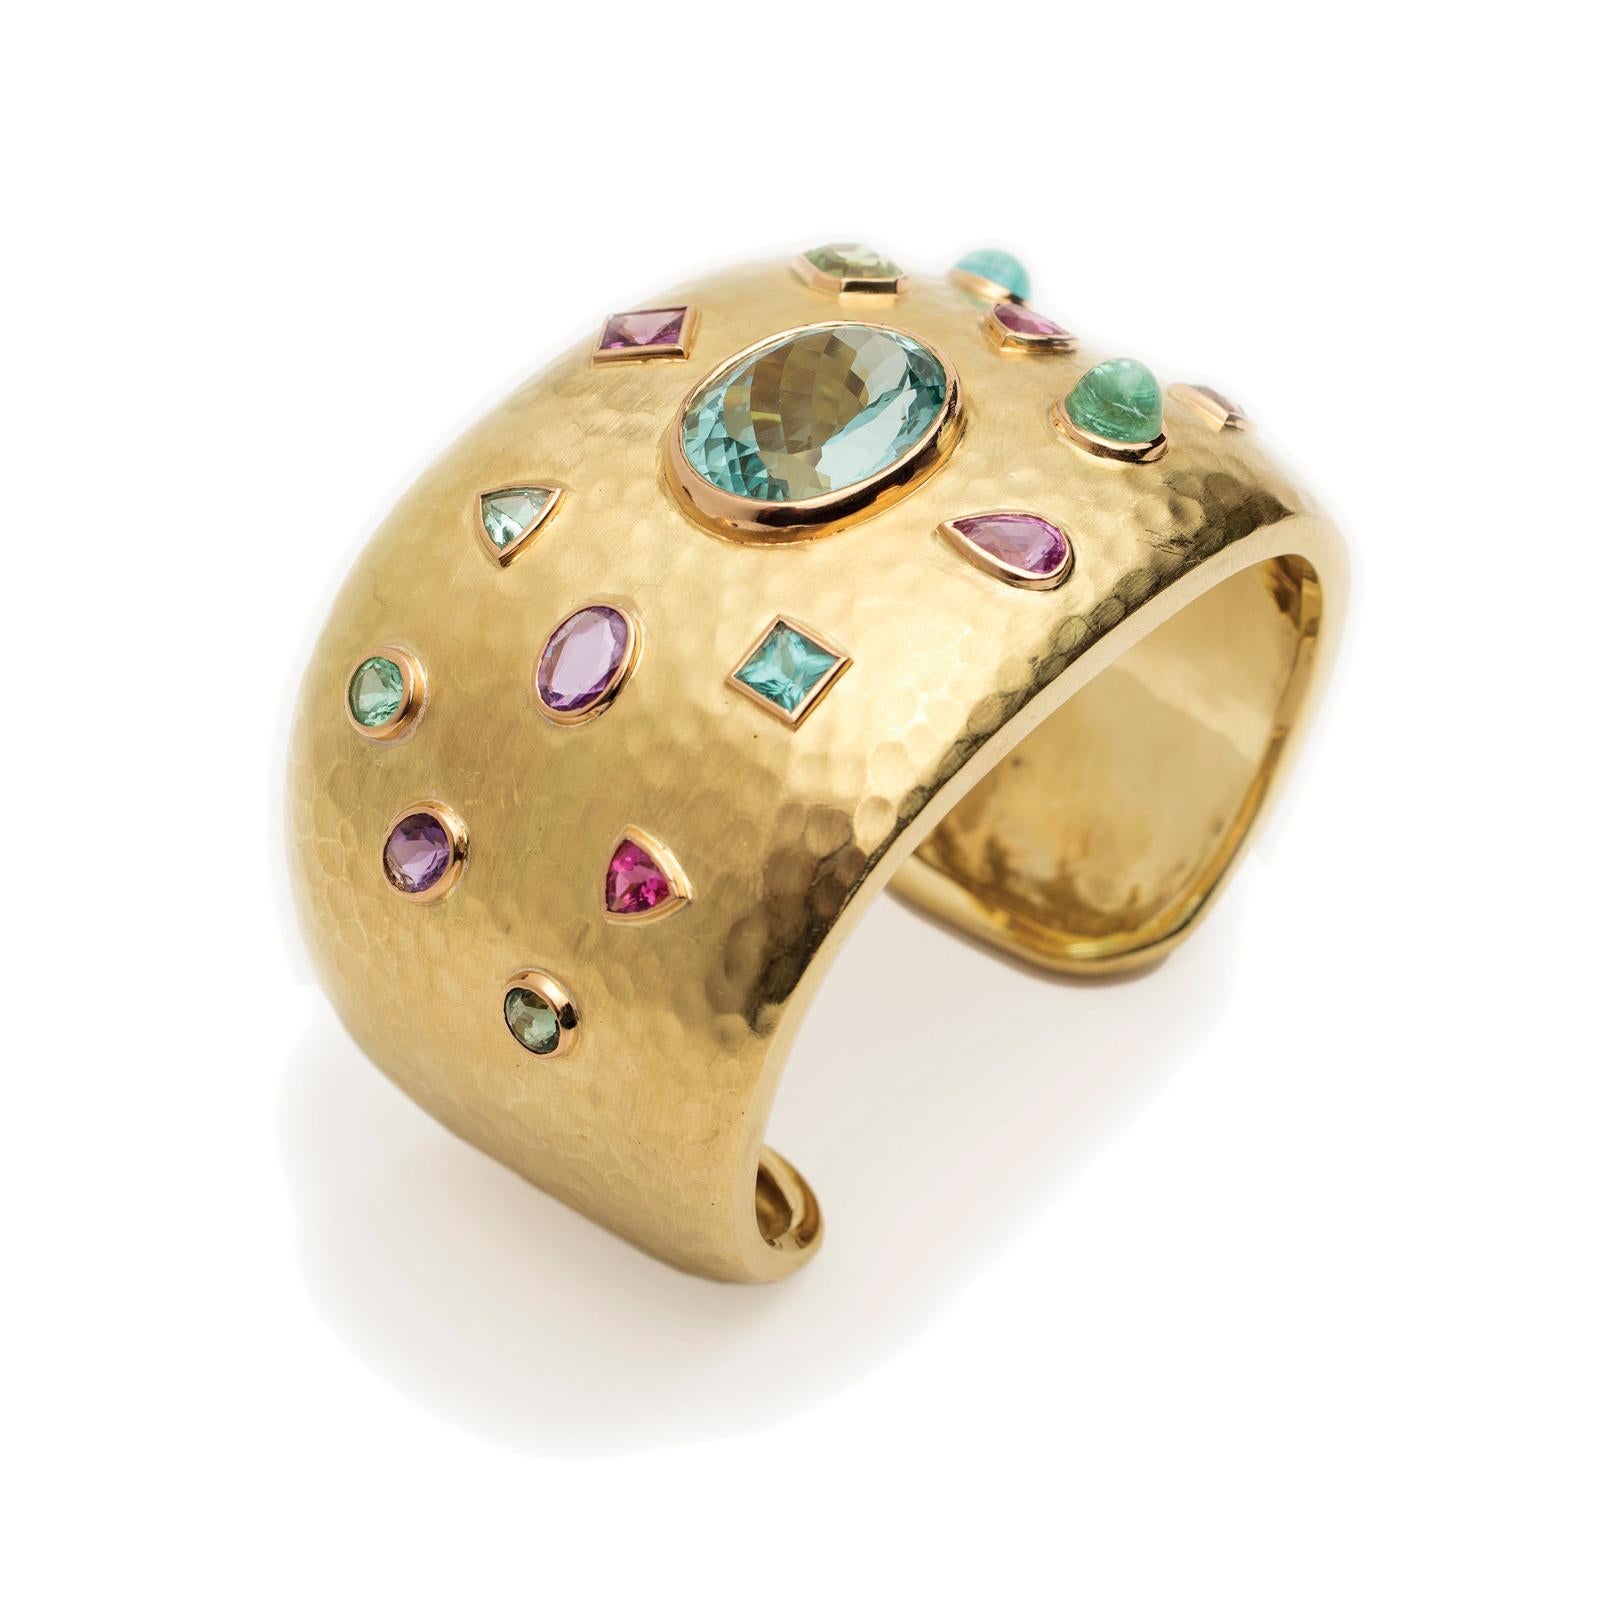 Fabulous, Bold and Brilliant! A magnificent Natural Blue/Green Aquamarine (21.9 Carat) is the centerpiece of this Hammered 18 Karat Gold Cuff, surrounded by exquisite Paraiba Tourmaline, Pink and Purple Sapphires and Pink and Green Tourmaline.

The